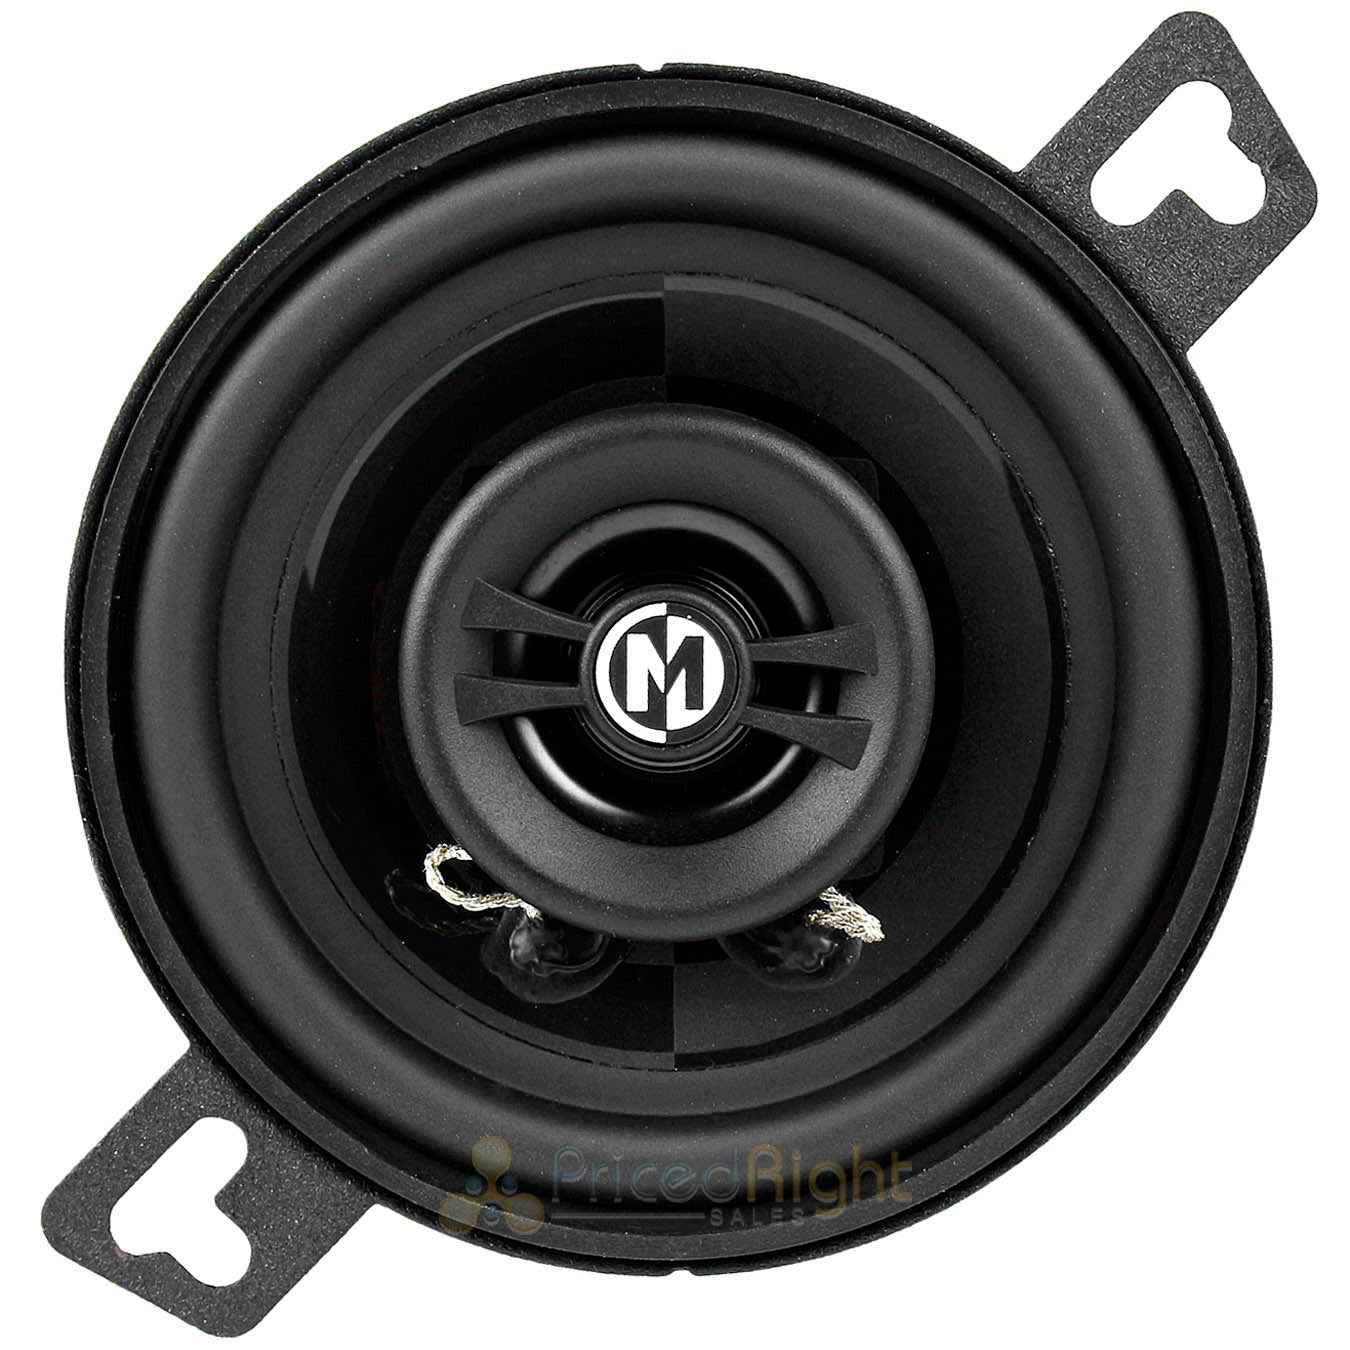 Memphis Audio 3.5" 2 Way Coaxial Speakers 30 Watts Max Power Reference PRX3